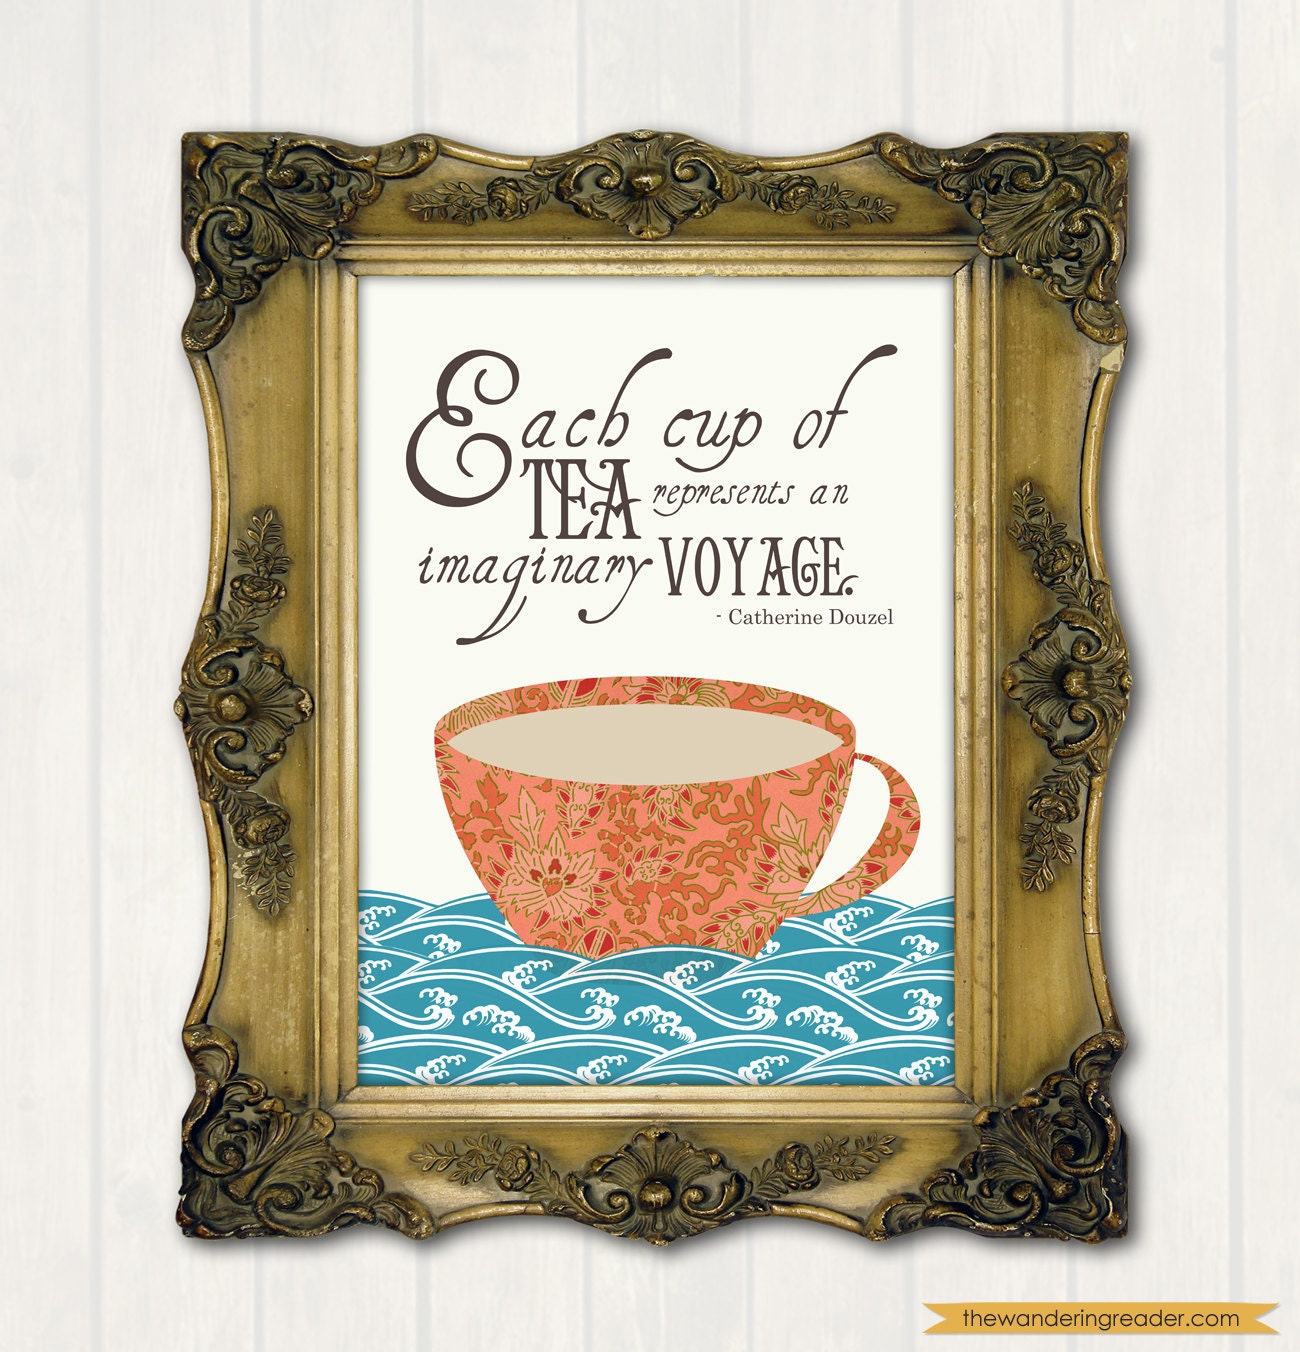 Tea Quote Print with Inspirational "Each cup of tea represents an imaginary voyage" Quotation and Teacup Illustration